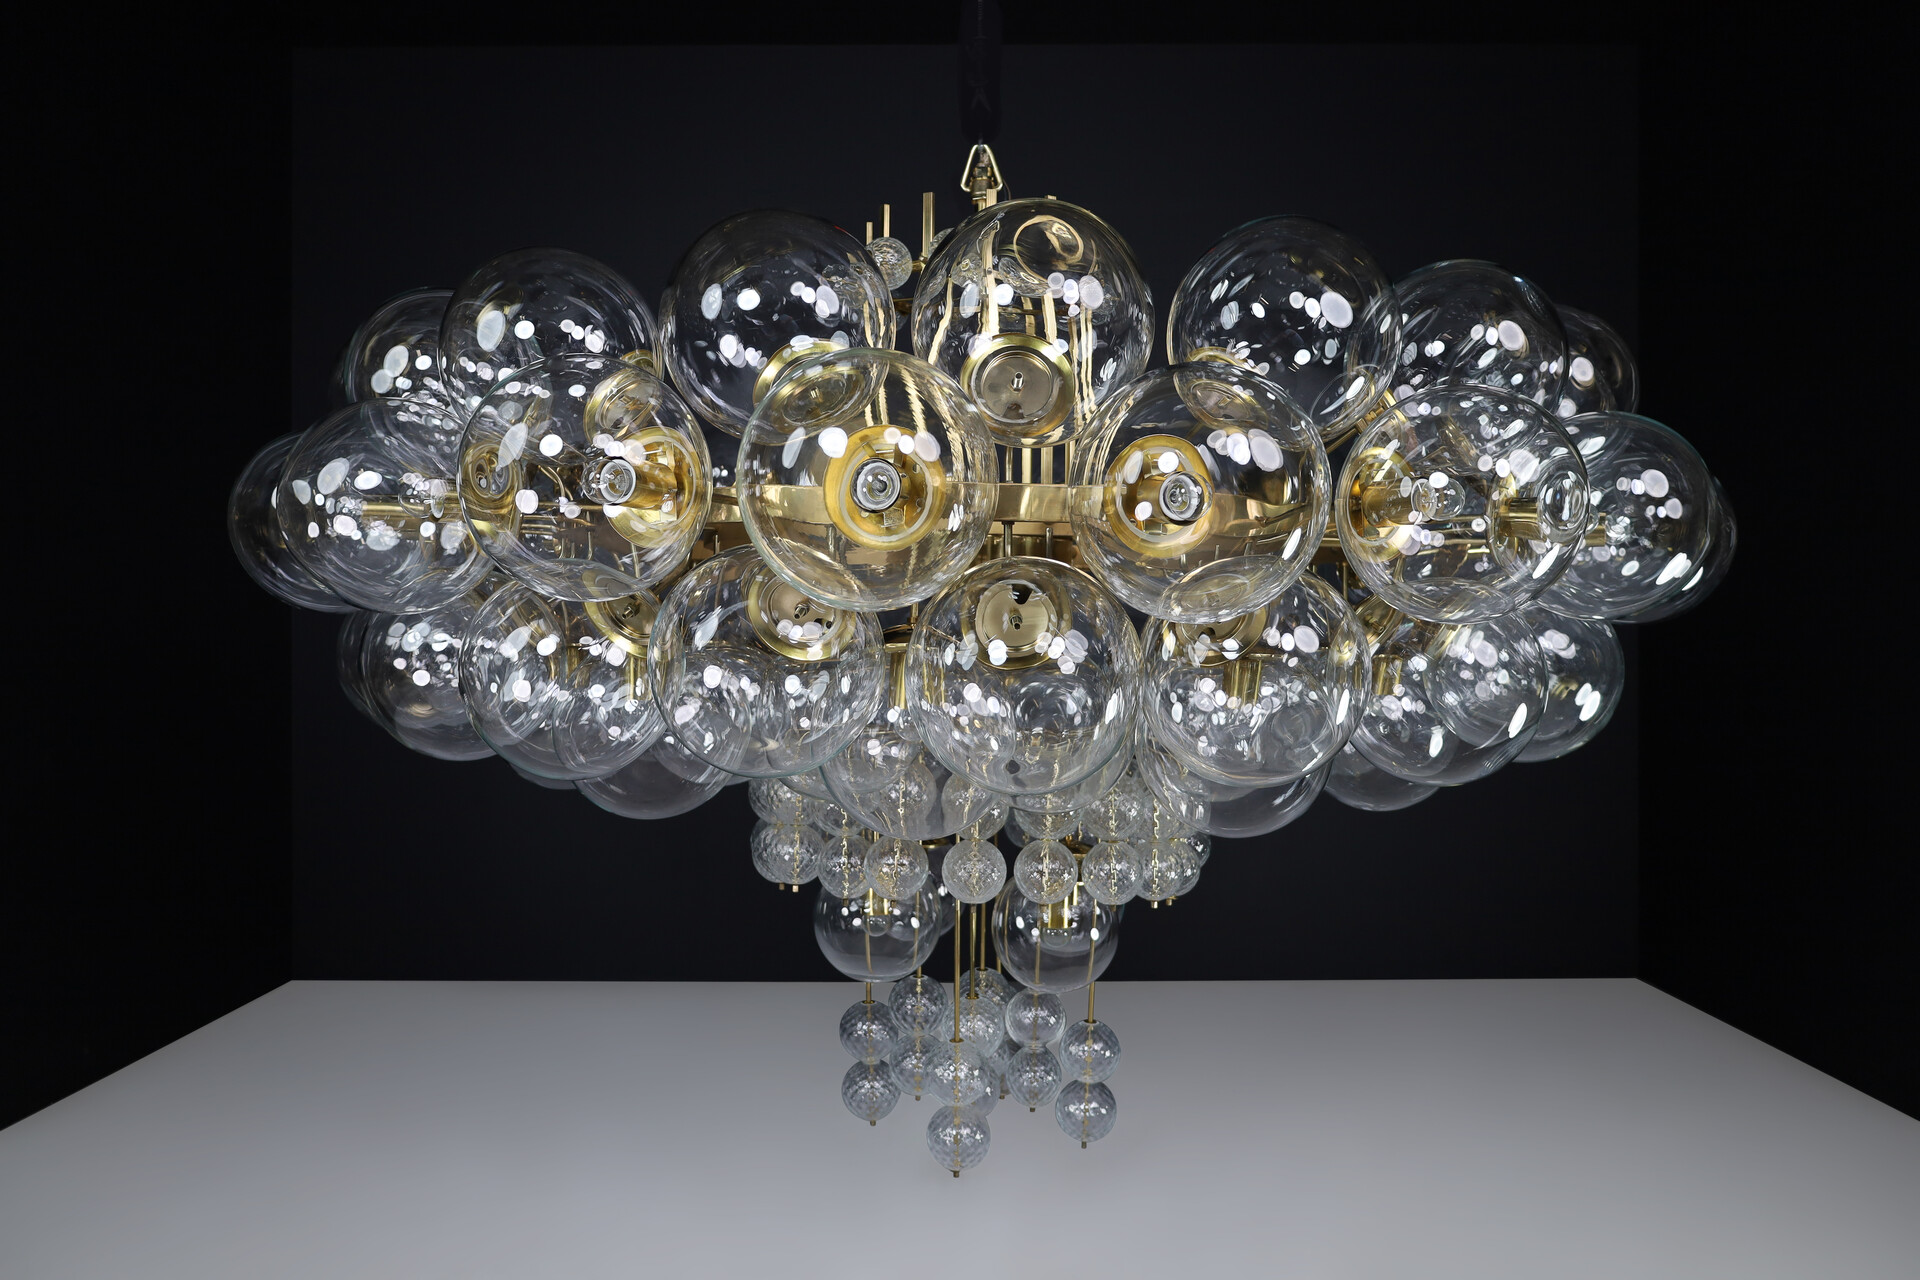 Mid century modern XXL hotel chandelier with brass fixture and hand-blowed glass globes by Preciosa, Czechia 1960s Mid-20th century